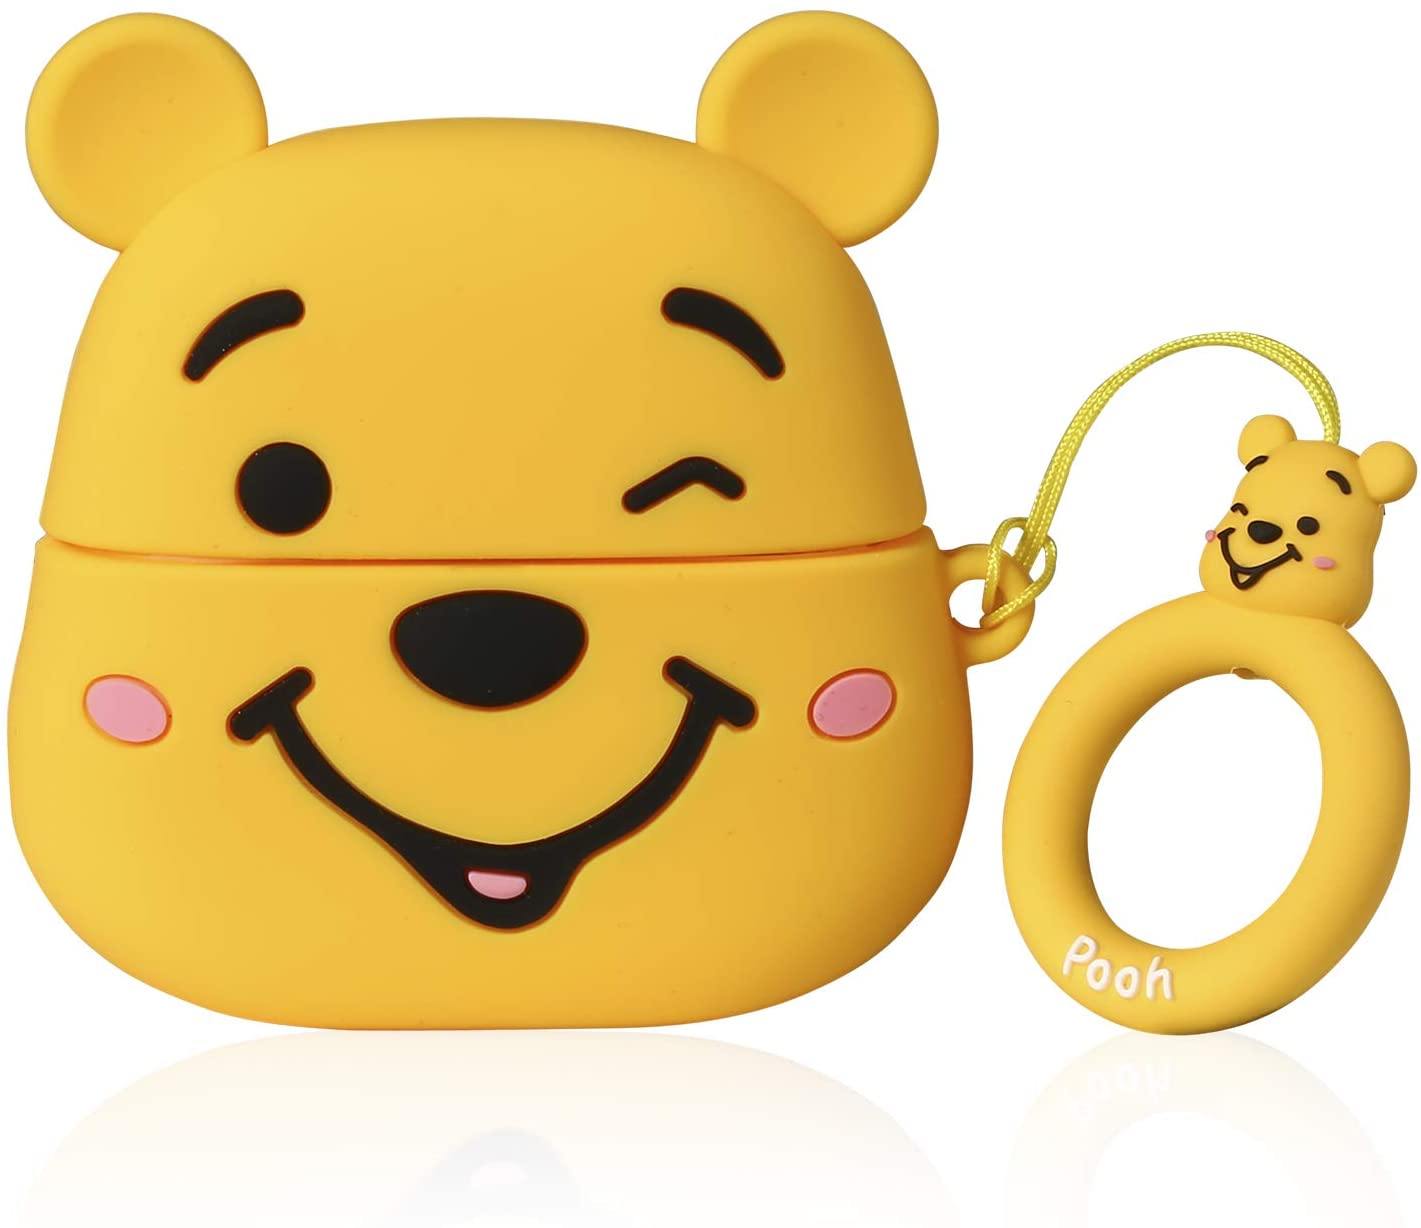 Pooh Wink Airpods Case